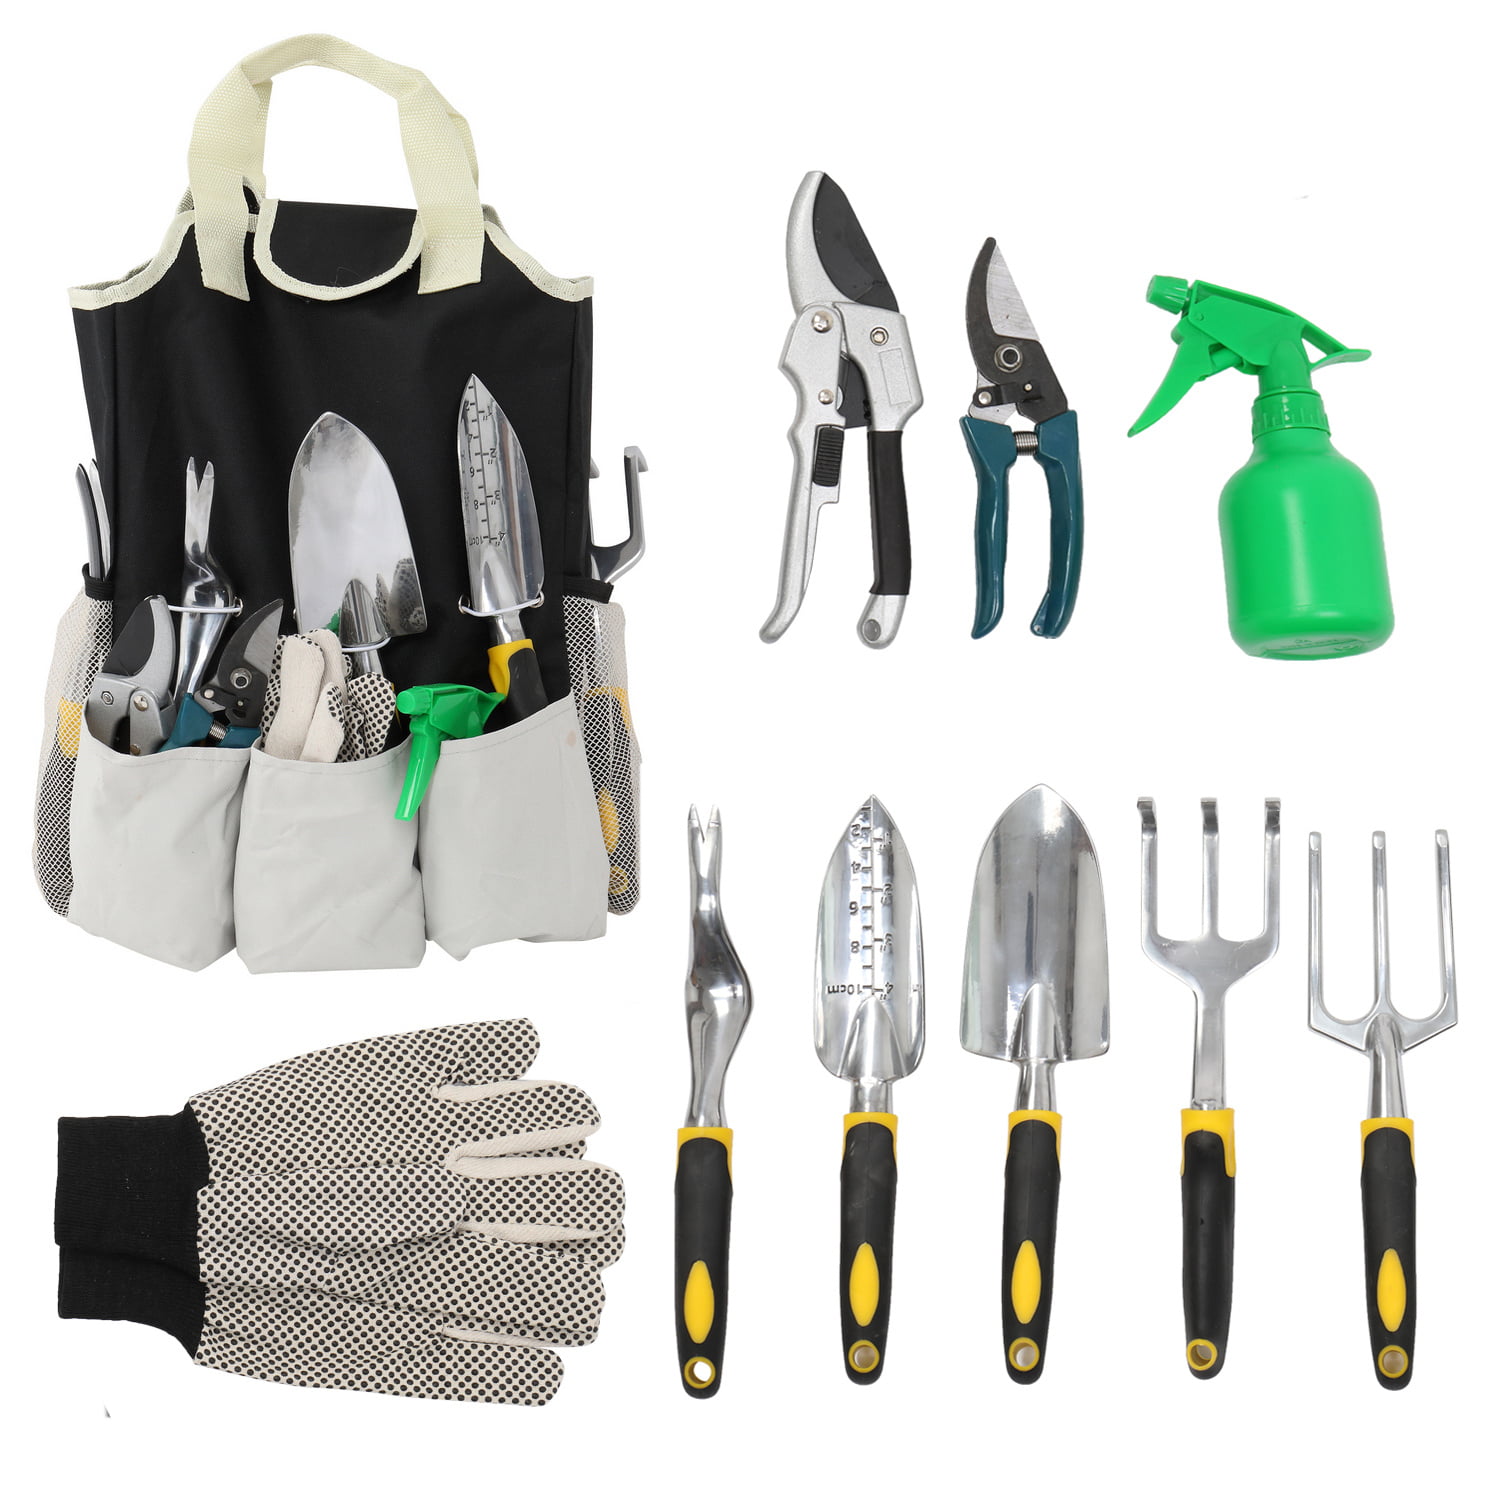 Garden Tools Set 10 Pieces Gardening Kit with Heavy Duty Aluminum Hand Tool and 